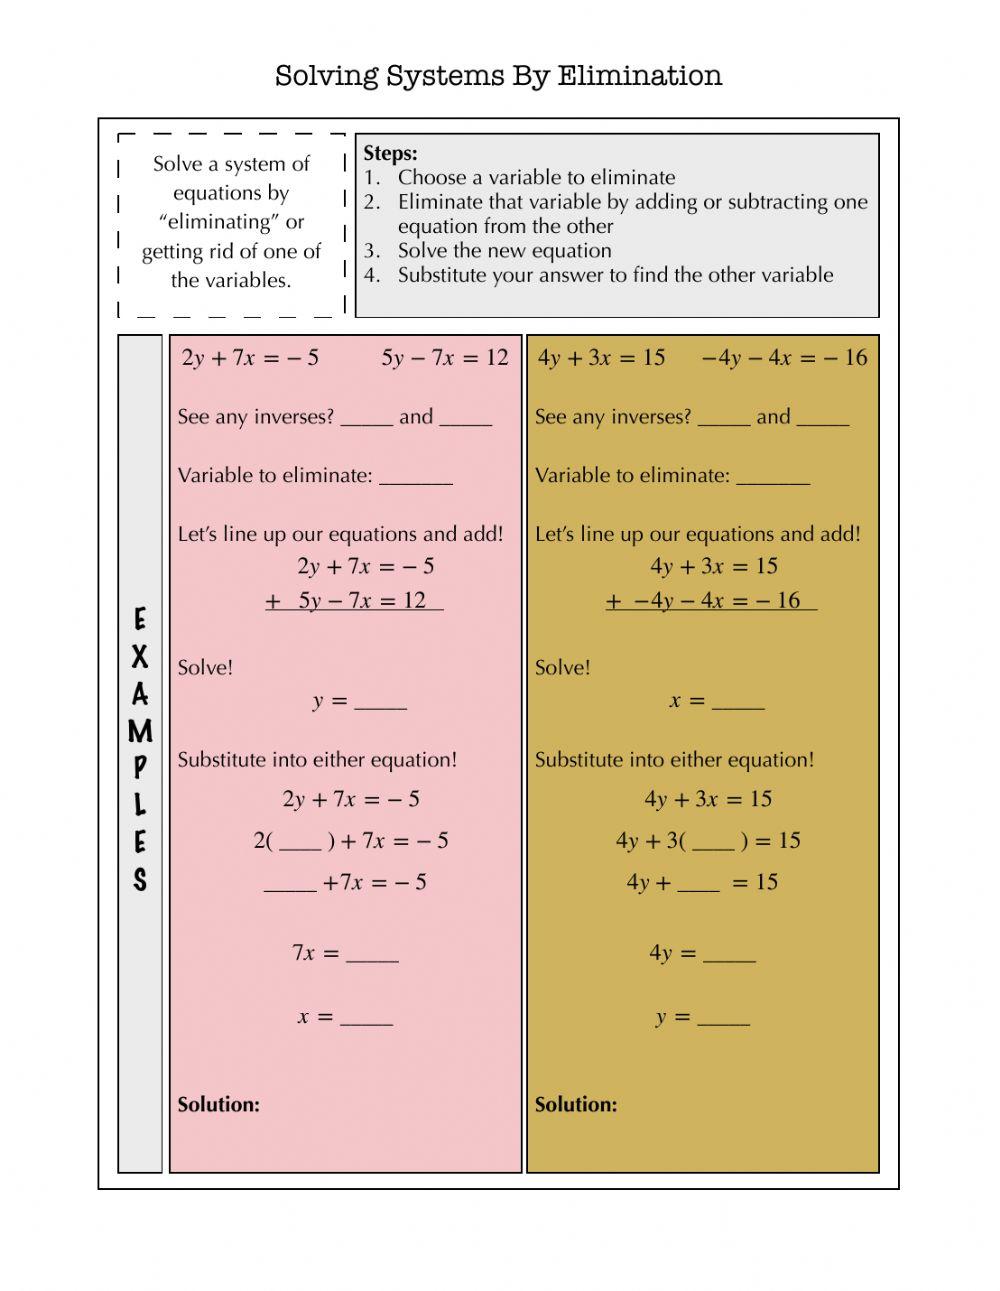 Solving Systems by Eliminations Notes